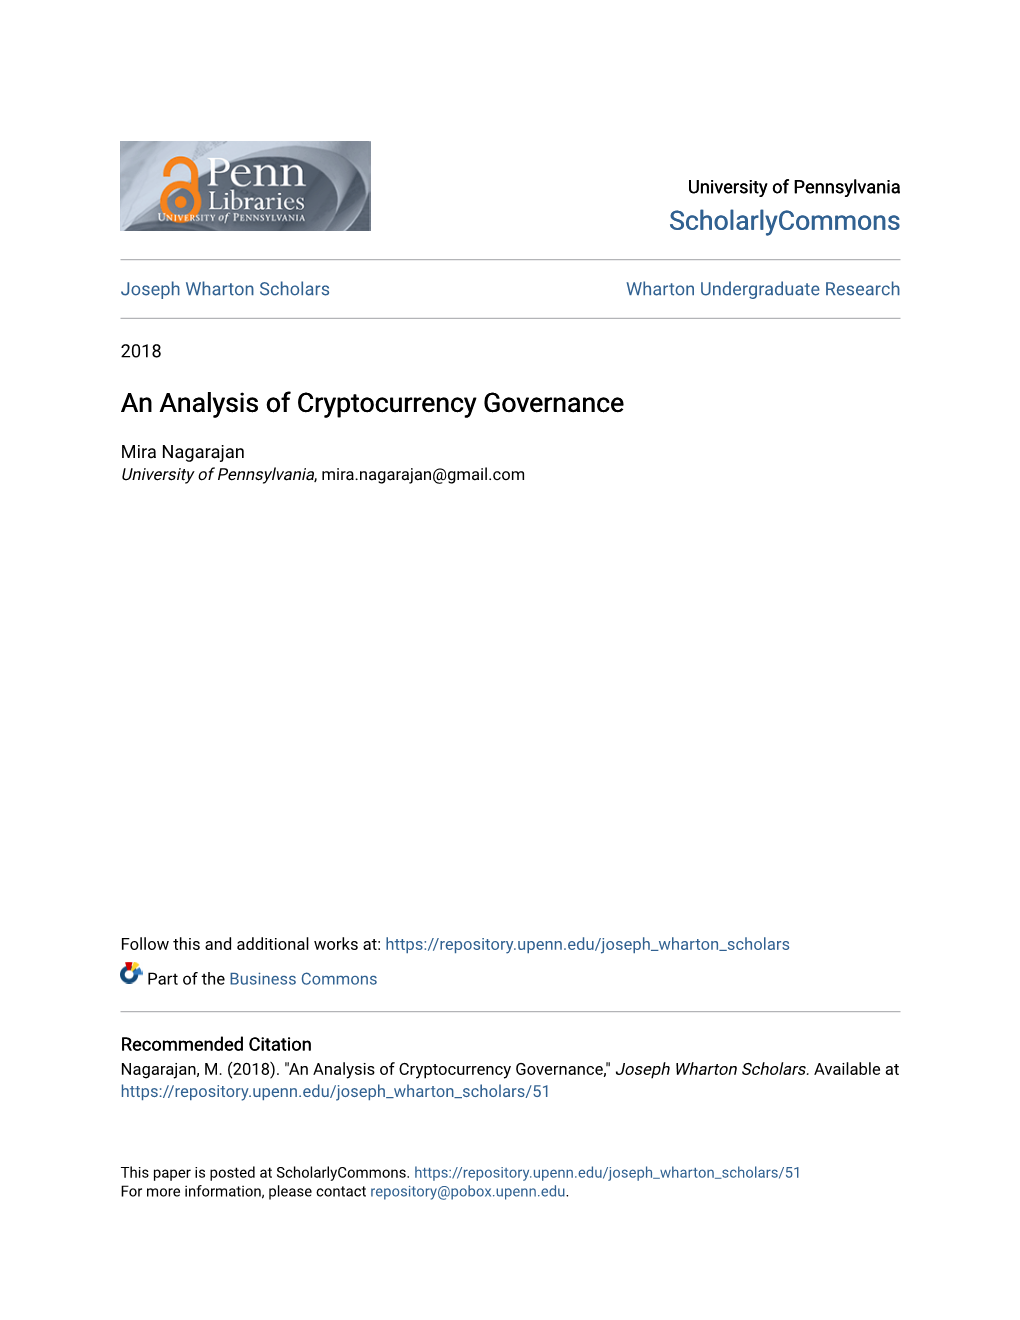 An Analysis of Cryptocurrency Governance